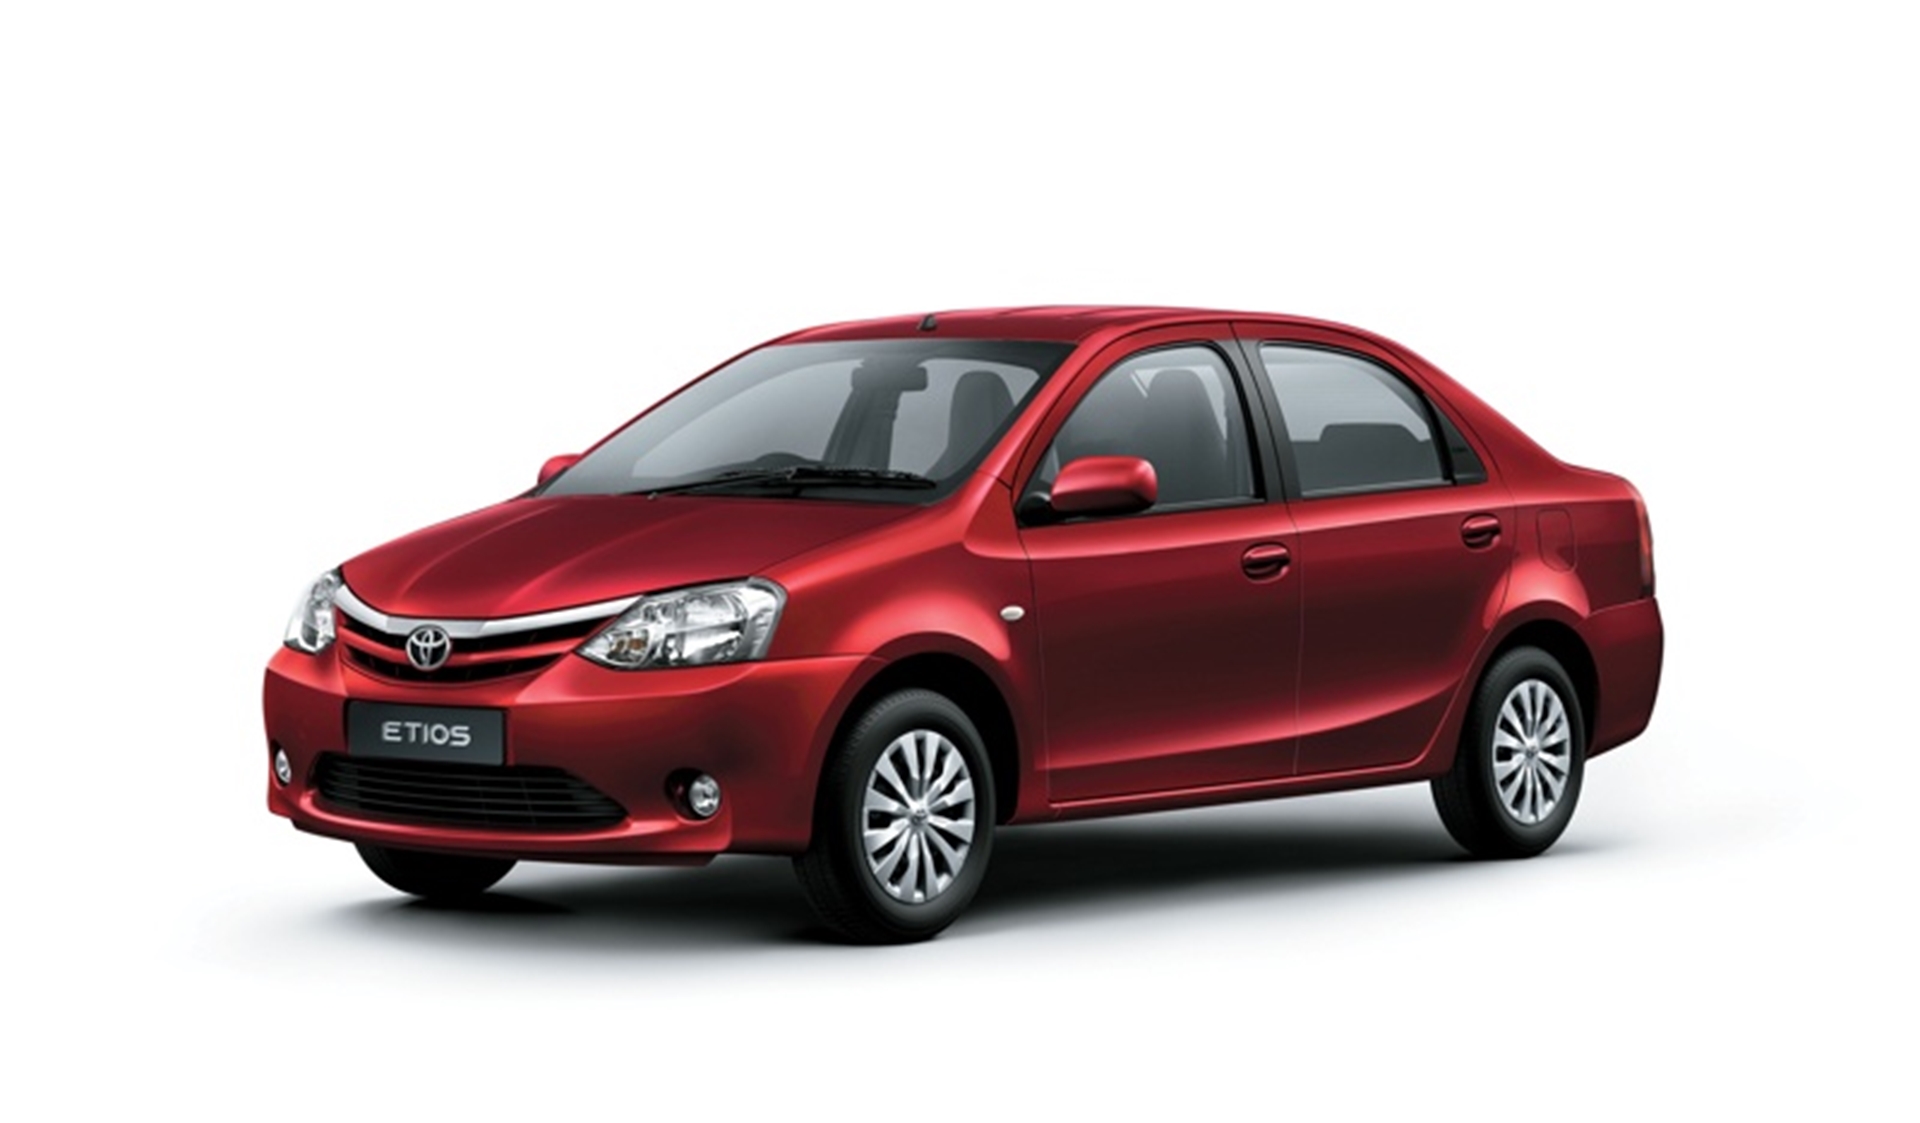 Toyota Etios comming to South Africa 21 May 2012